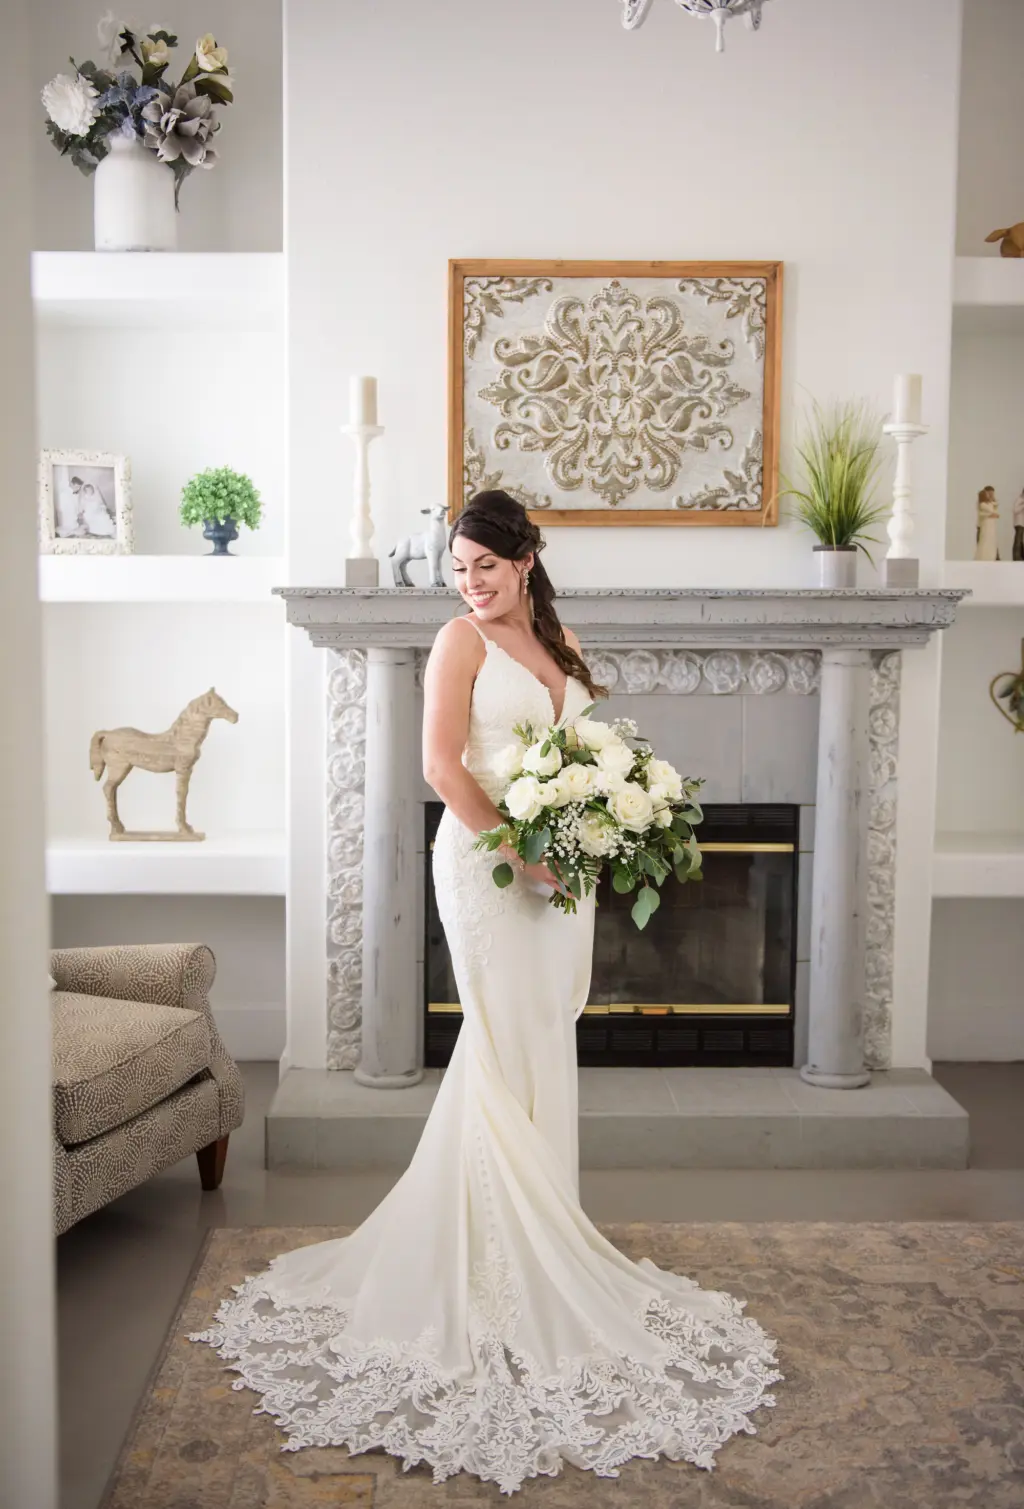 Elegant Bridal Wedding Hair and Makeup Ideas | Tampa Bay Artist Adore Bridal | Bride Getting Ready Wedding Portrait | White Lace and Satin Fit and Flare Stella York Wedding Dress Inspiration